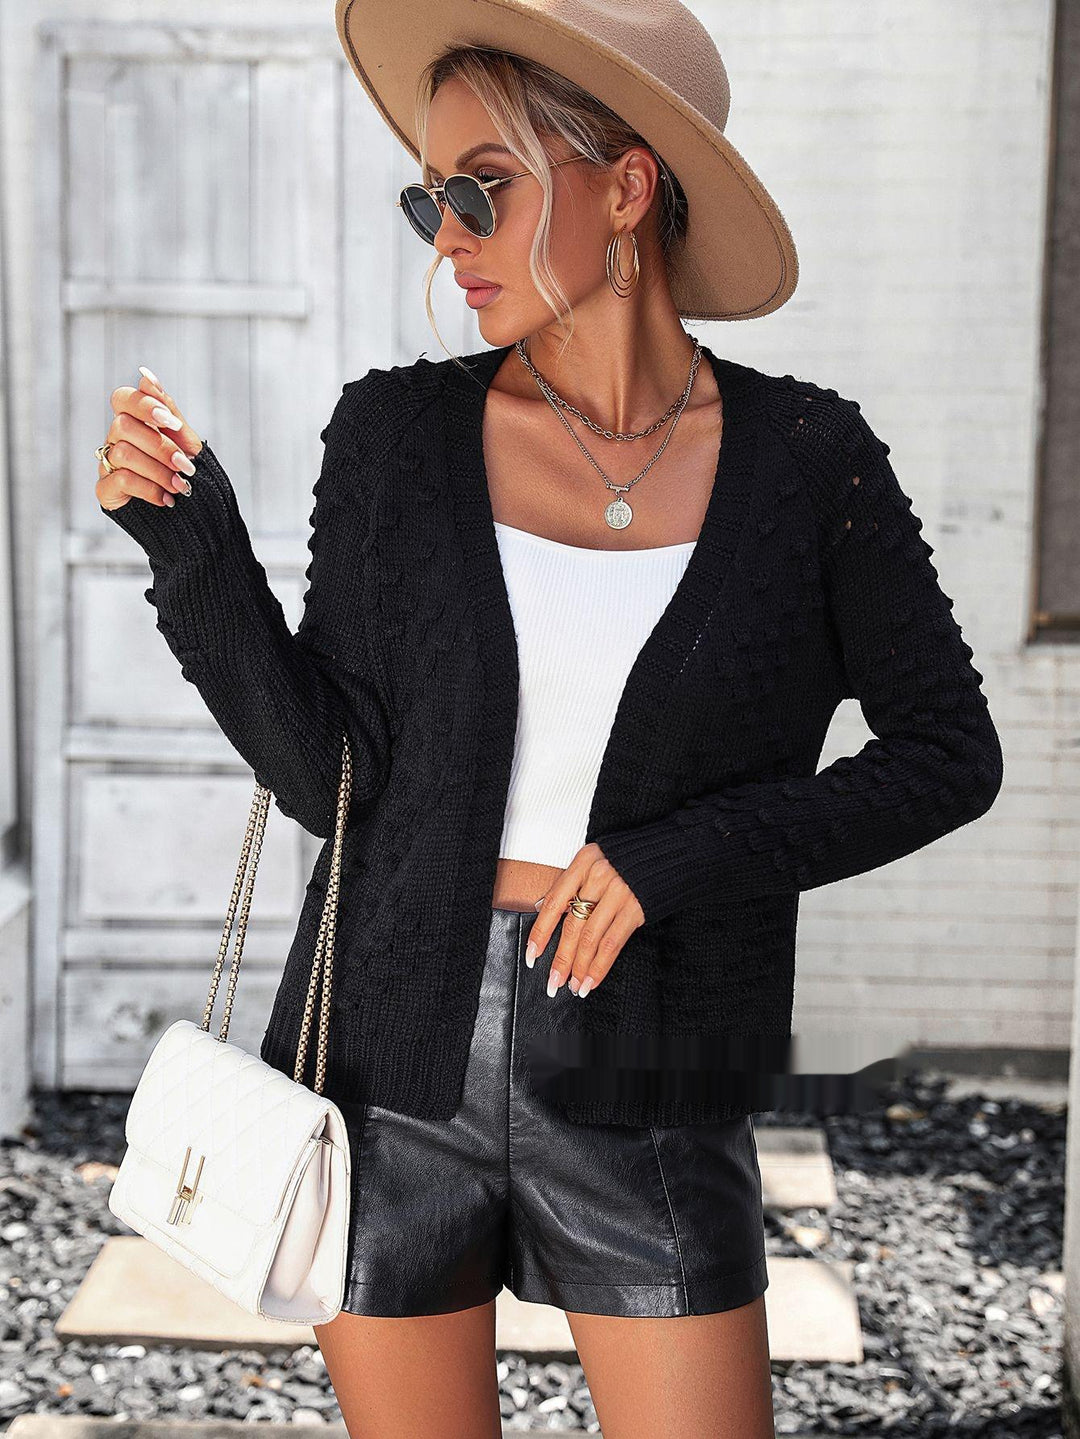 Women's Knitted Sweater Three-dimensional Pattern Cardigan Coat Sweater